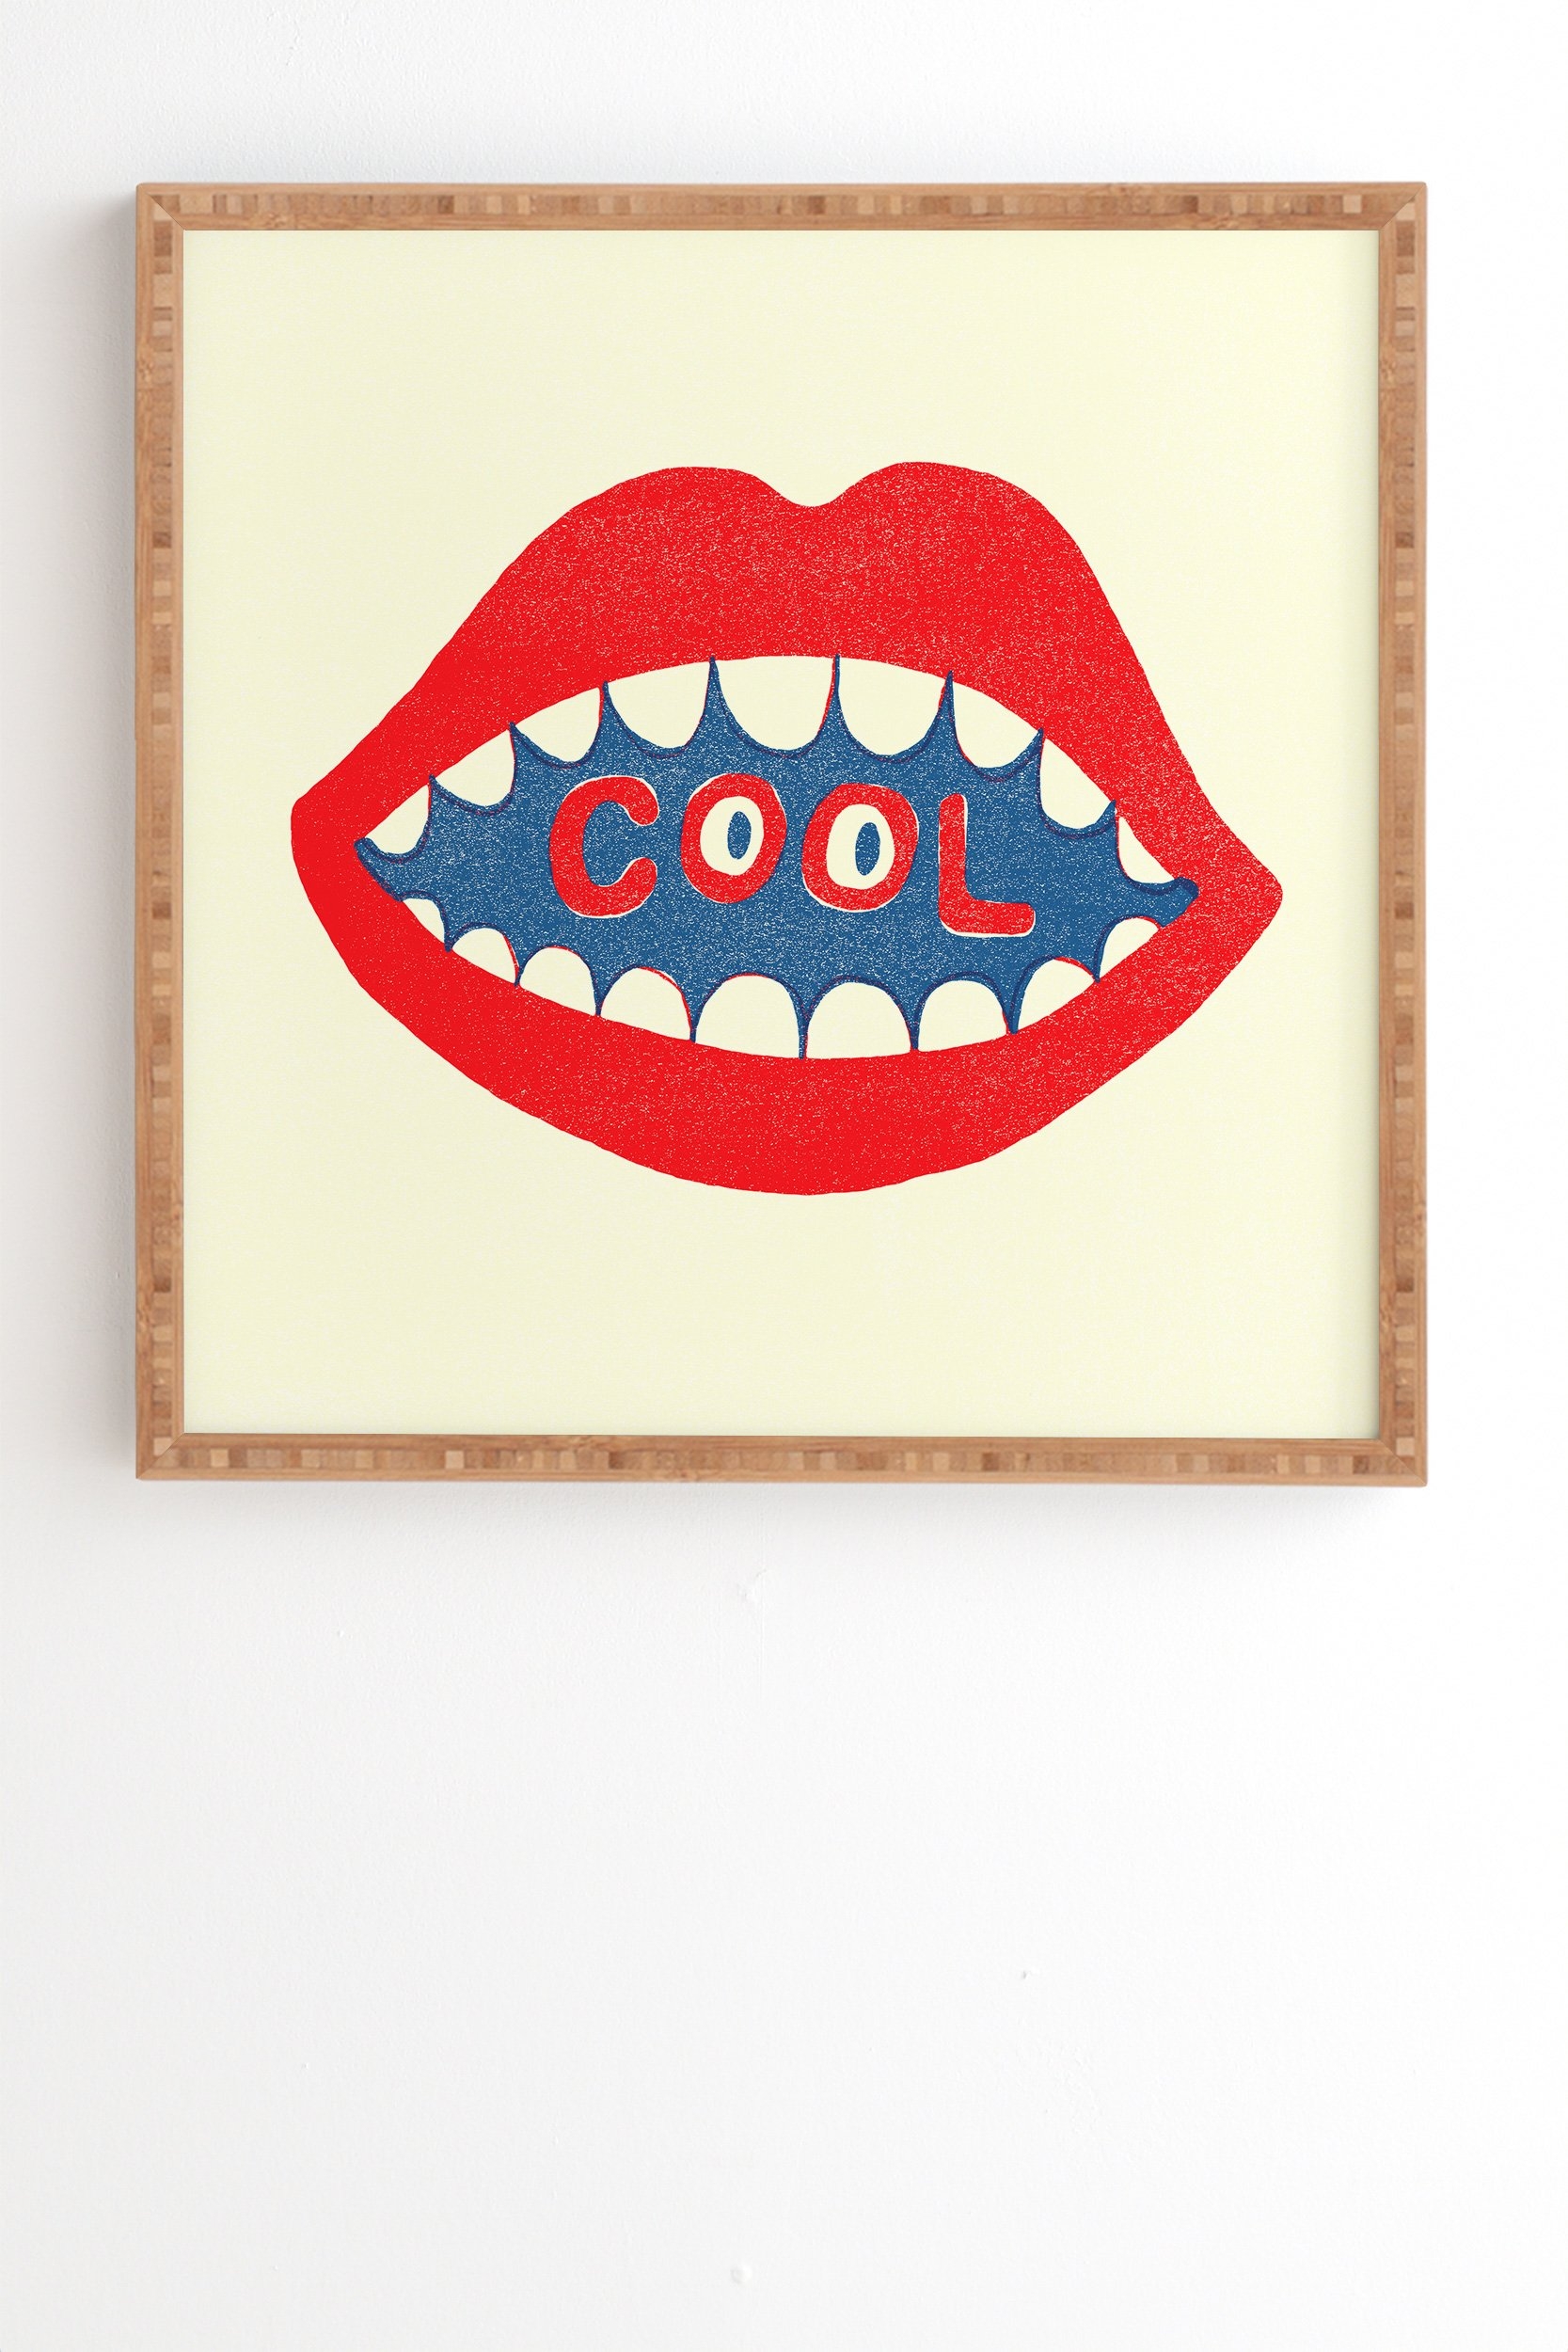 COOL MOUTH By Nick Nelson 30x30 - Image 0